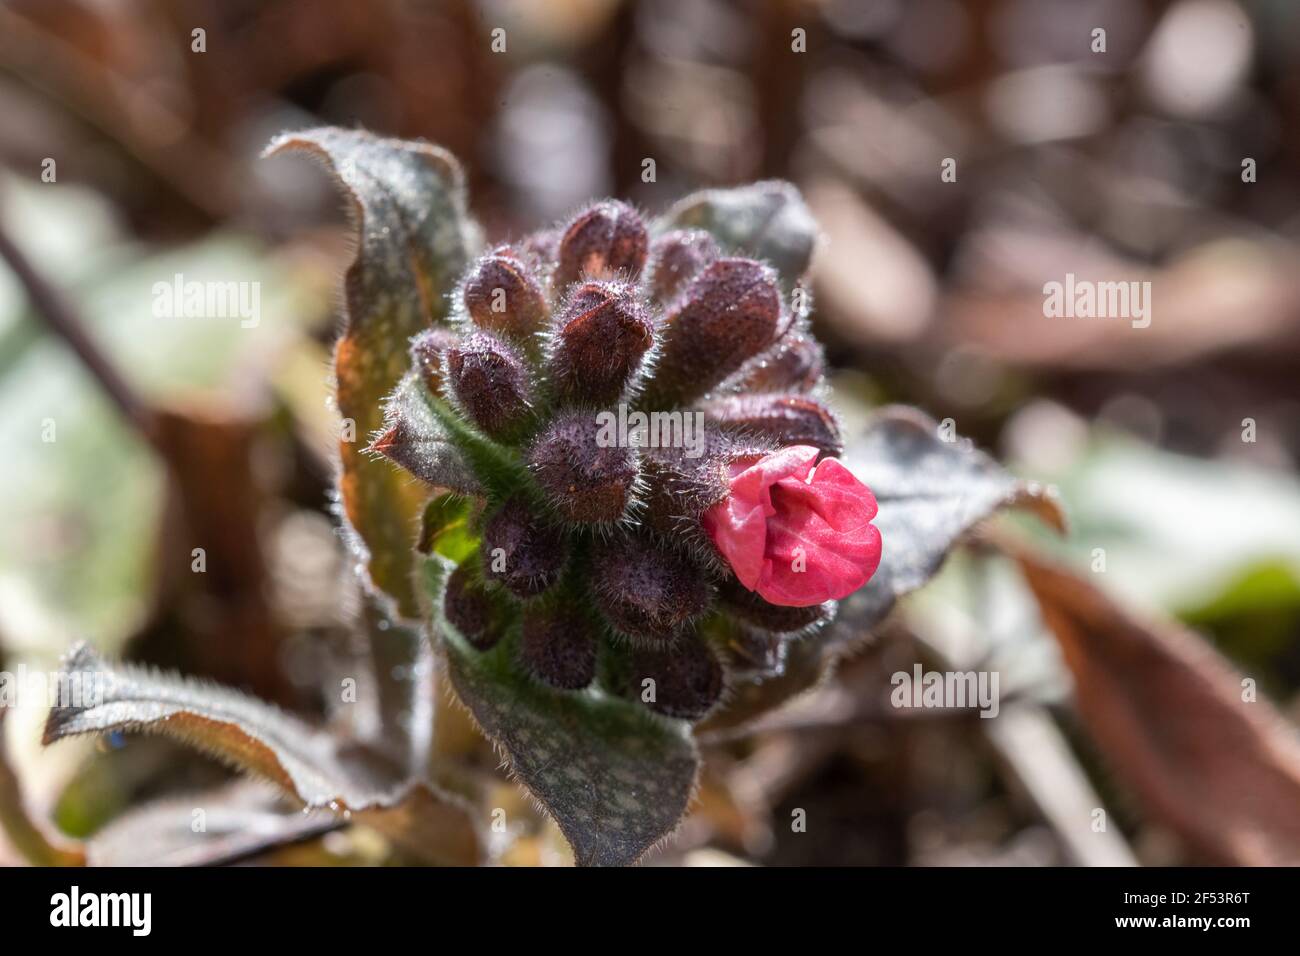 The lungwort, Pulmonaria officinalis, is a wild plant and ecologically very valuable and important as a food source for many insects. The lungwort is Stock Photo